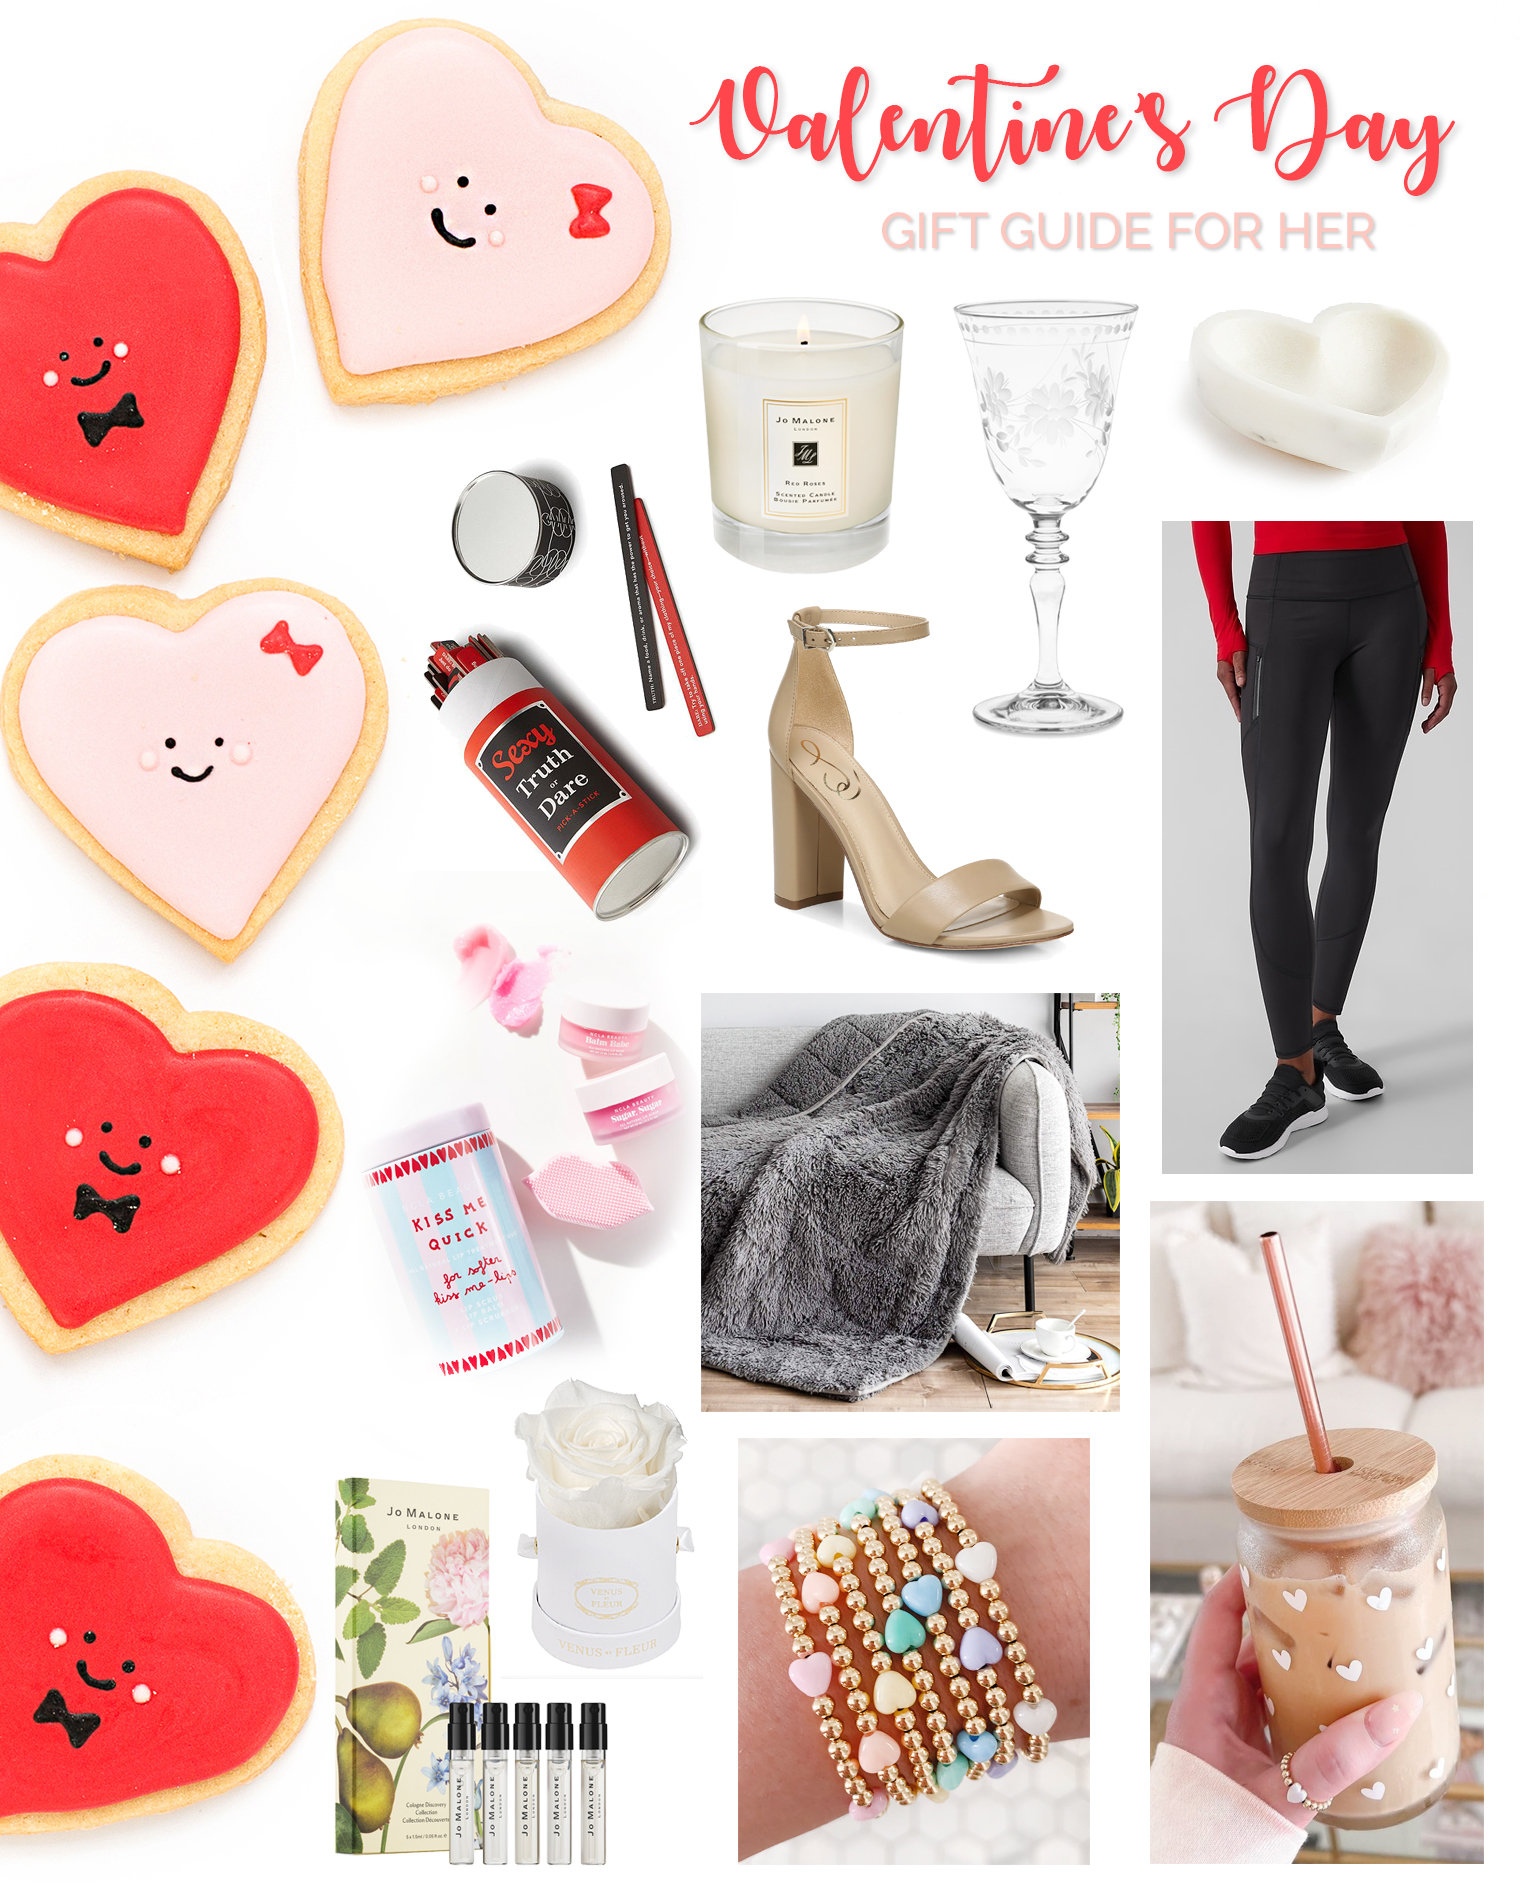 Valentine's Day Gift Guide